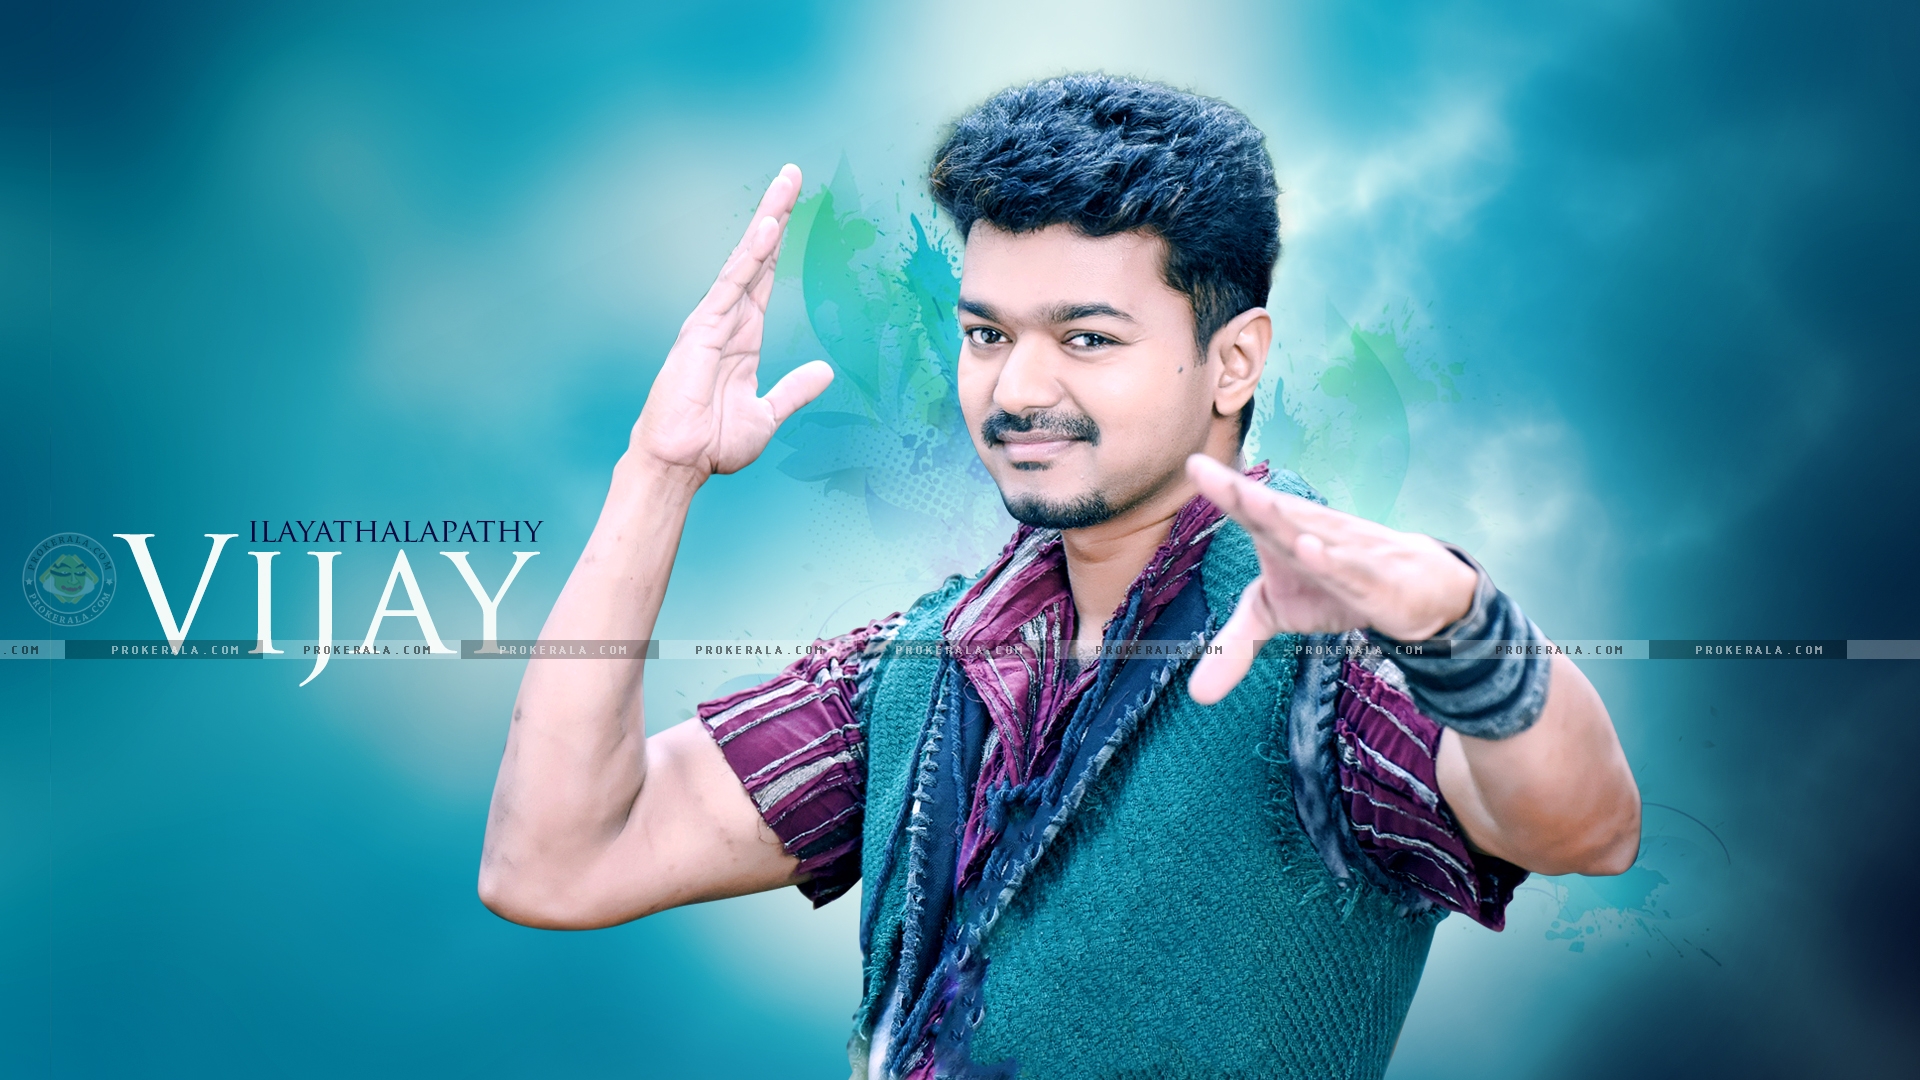 Thalapathy Vijay Desktop Wallpapers Wallpaper Cave We have a massive amount of desktop and mobile if you're looking for the best laptop wallpapers hd then wallpapertag is the place to be. thalapathy vijay desktop wallpapers